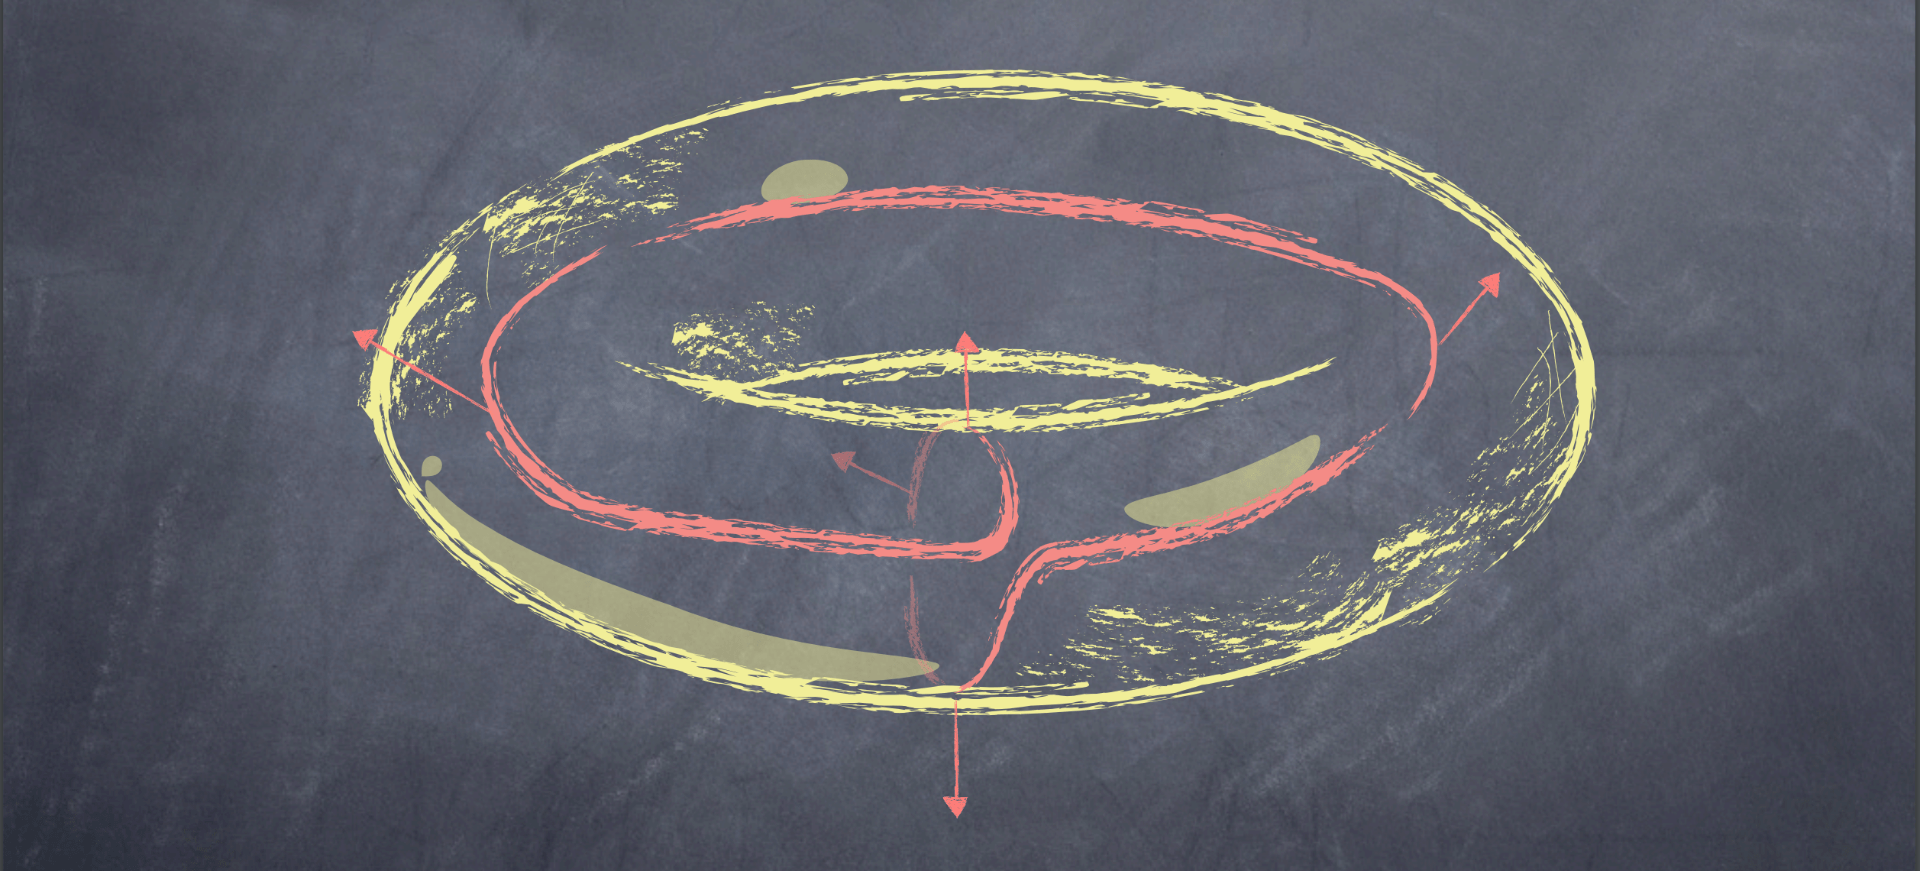 An abstract mathematical symbol in yellow and red chalk on a blackboard.